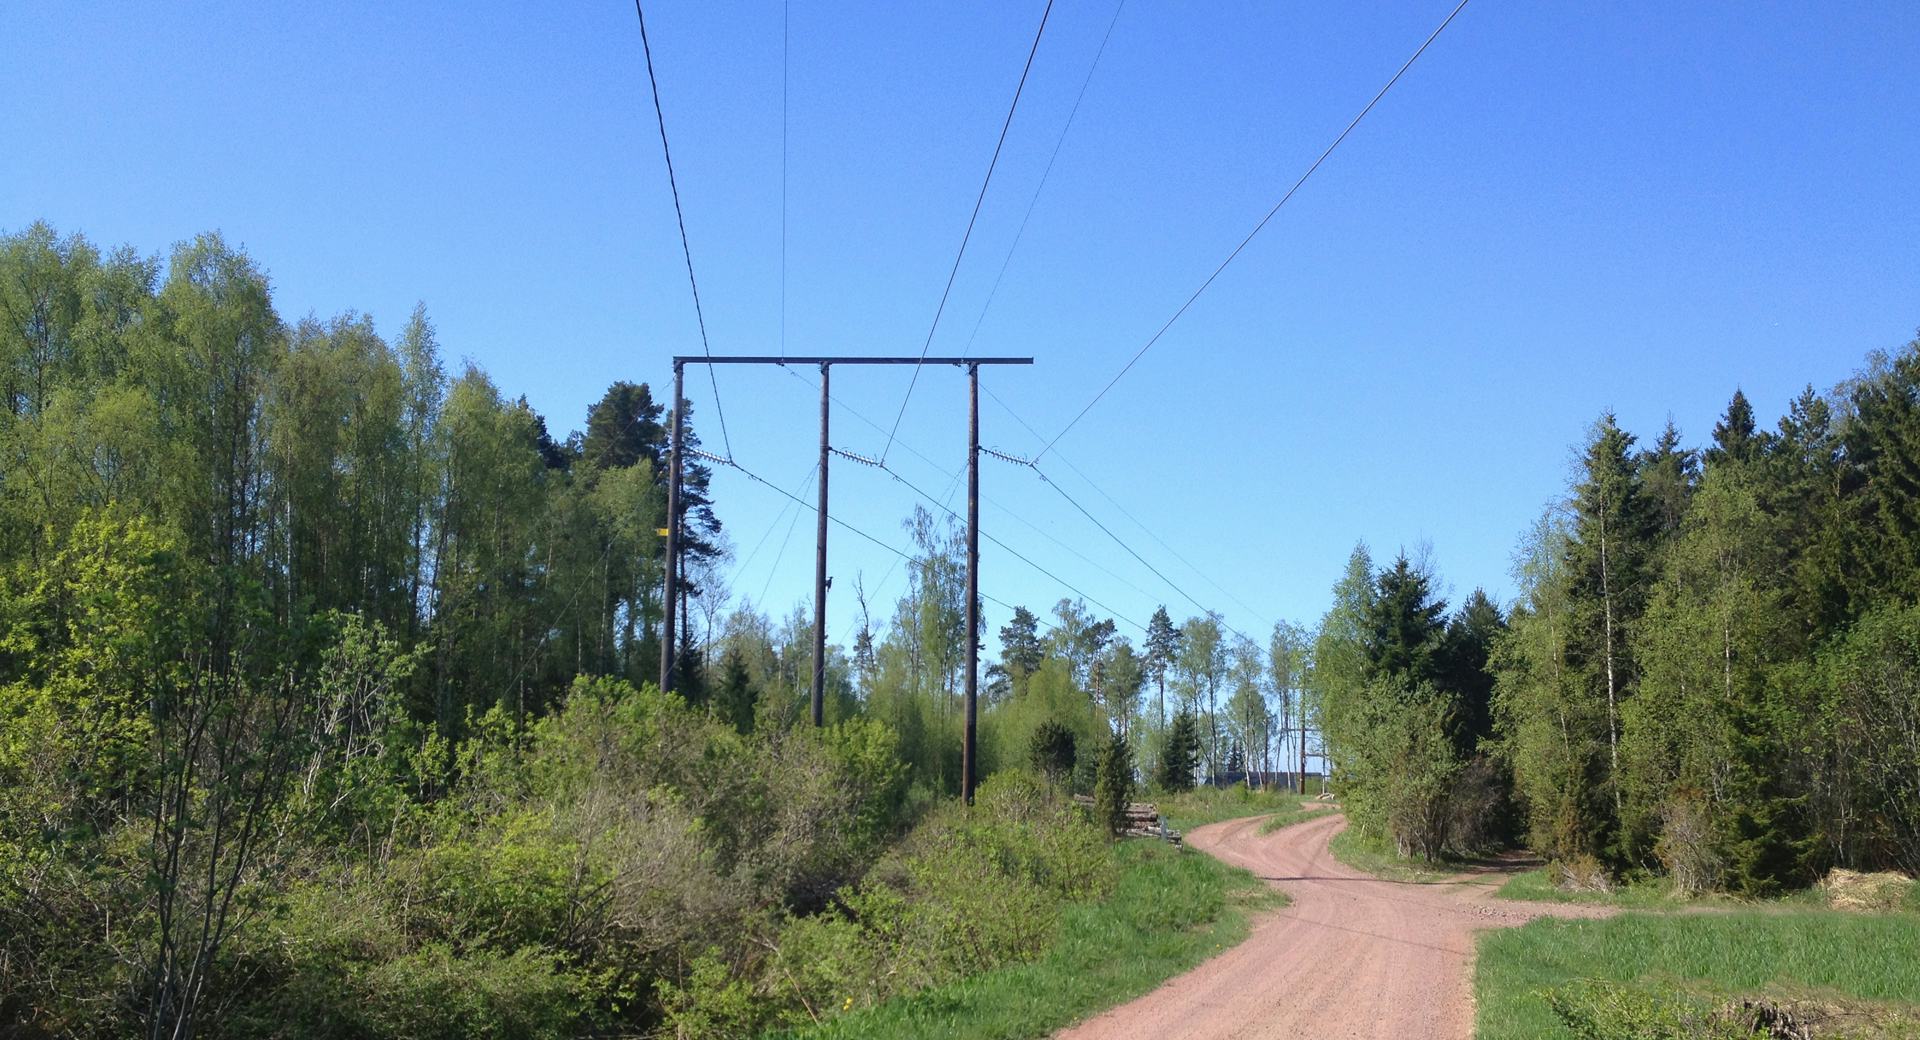 Transmission tower surrounded by pine trees, under clear blue sky